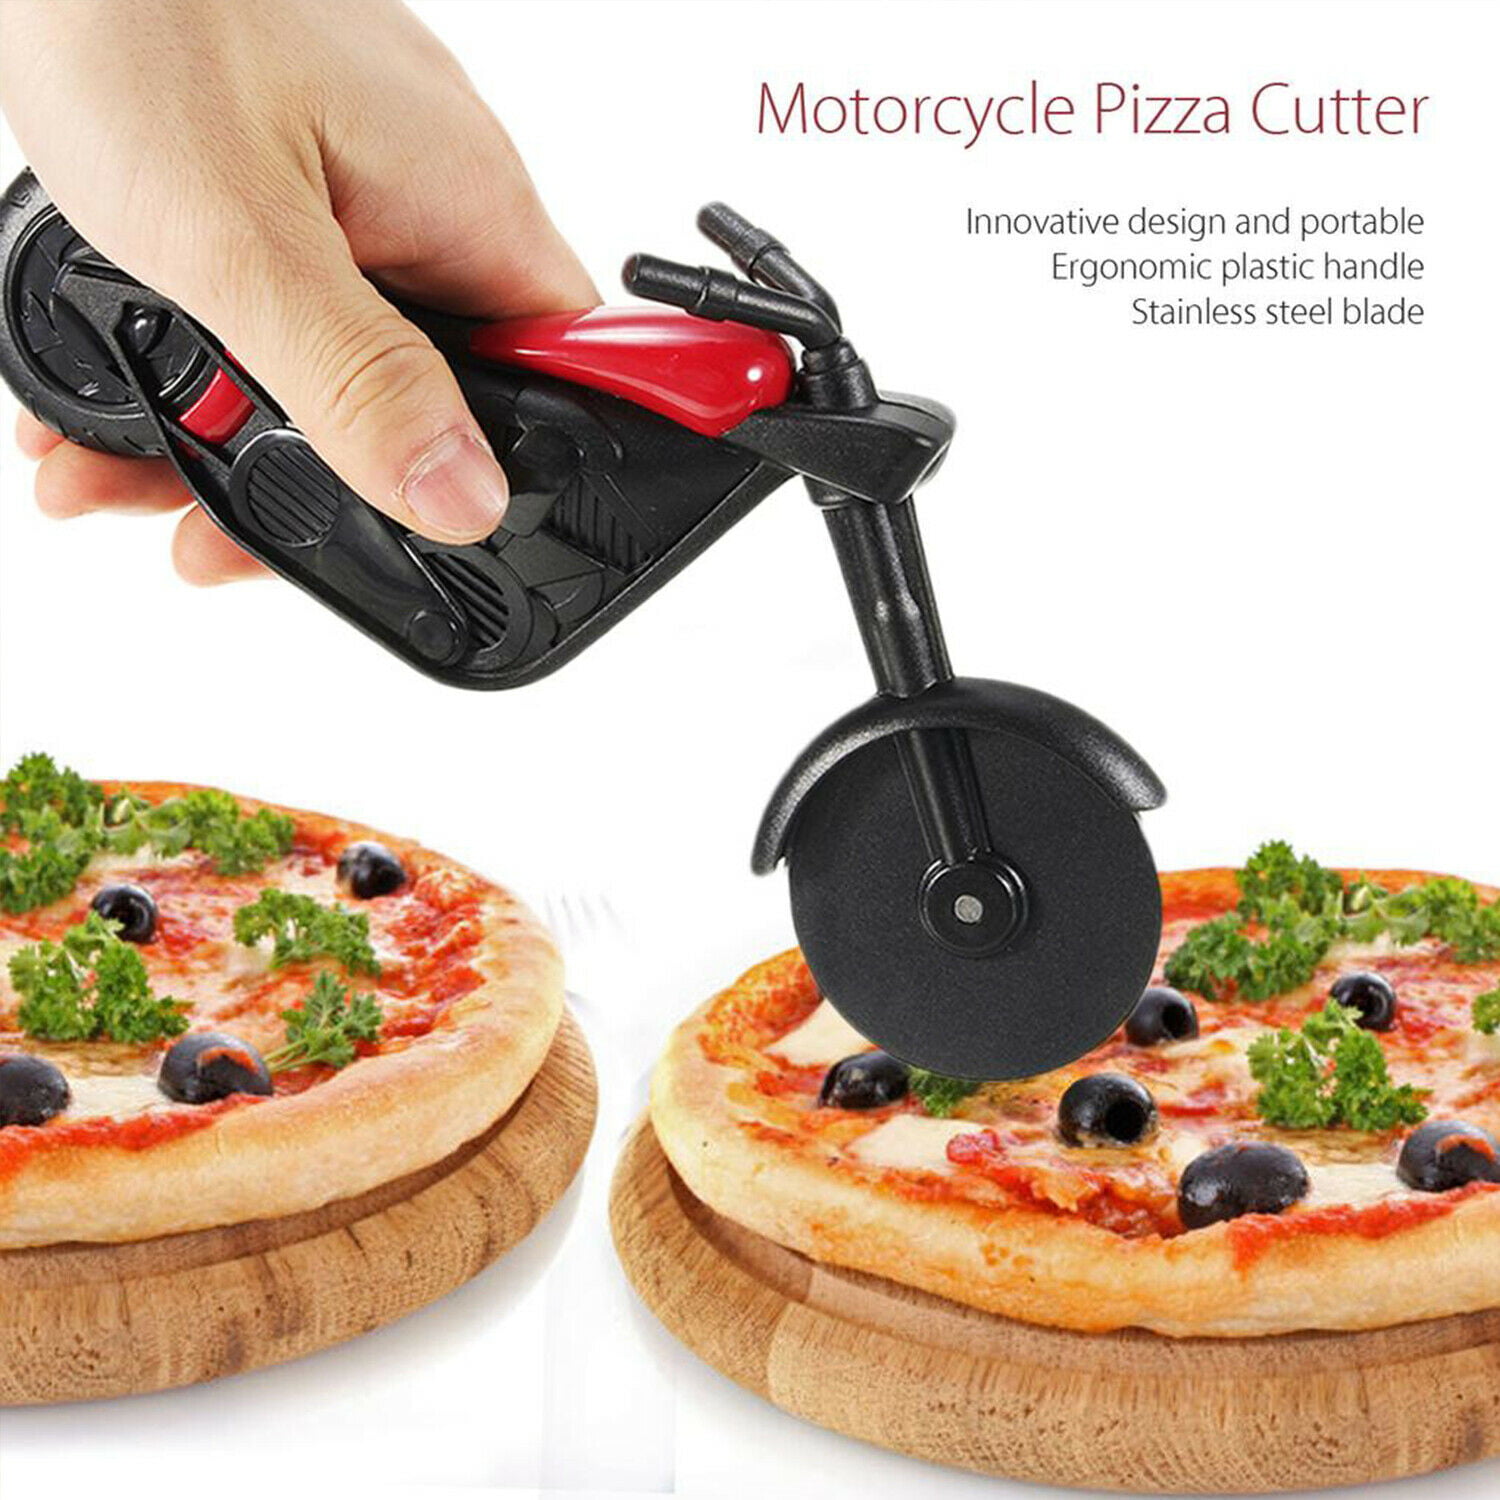 Stainless Steel Motorcycle Pizza Cutter Pizza Cake Roller Slicer Kitchen NW K0M2 